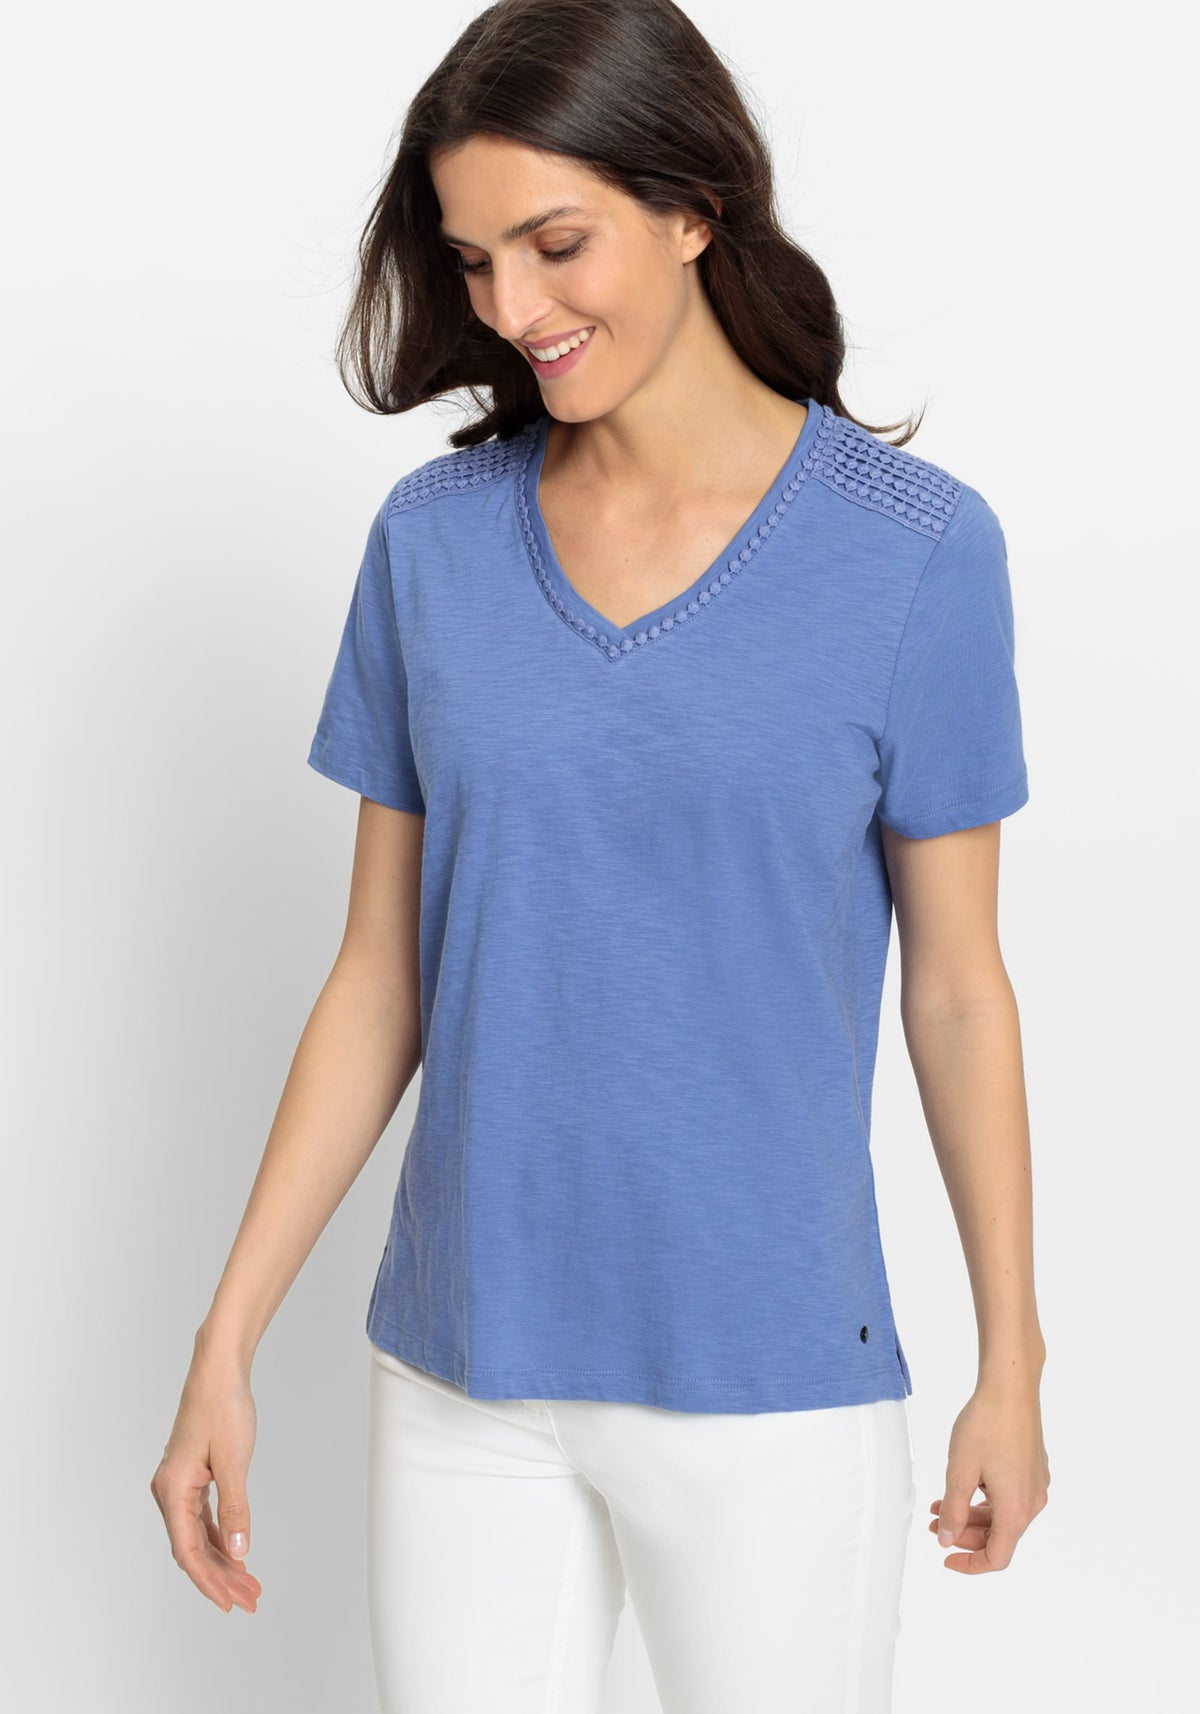 100% Cotton Short Sleeve Tee with Embroidered Trim